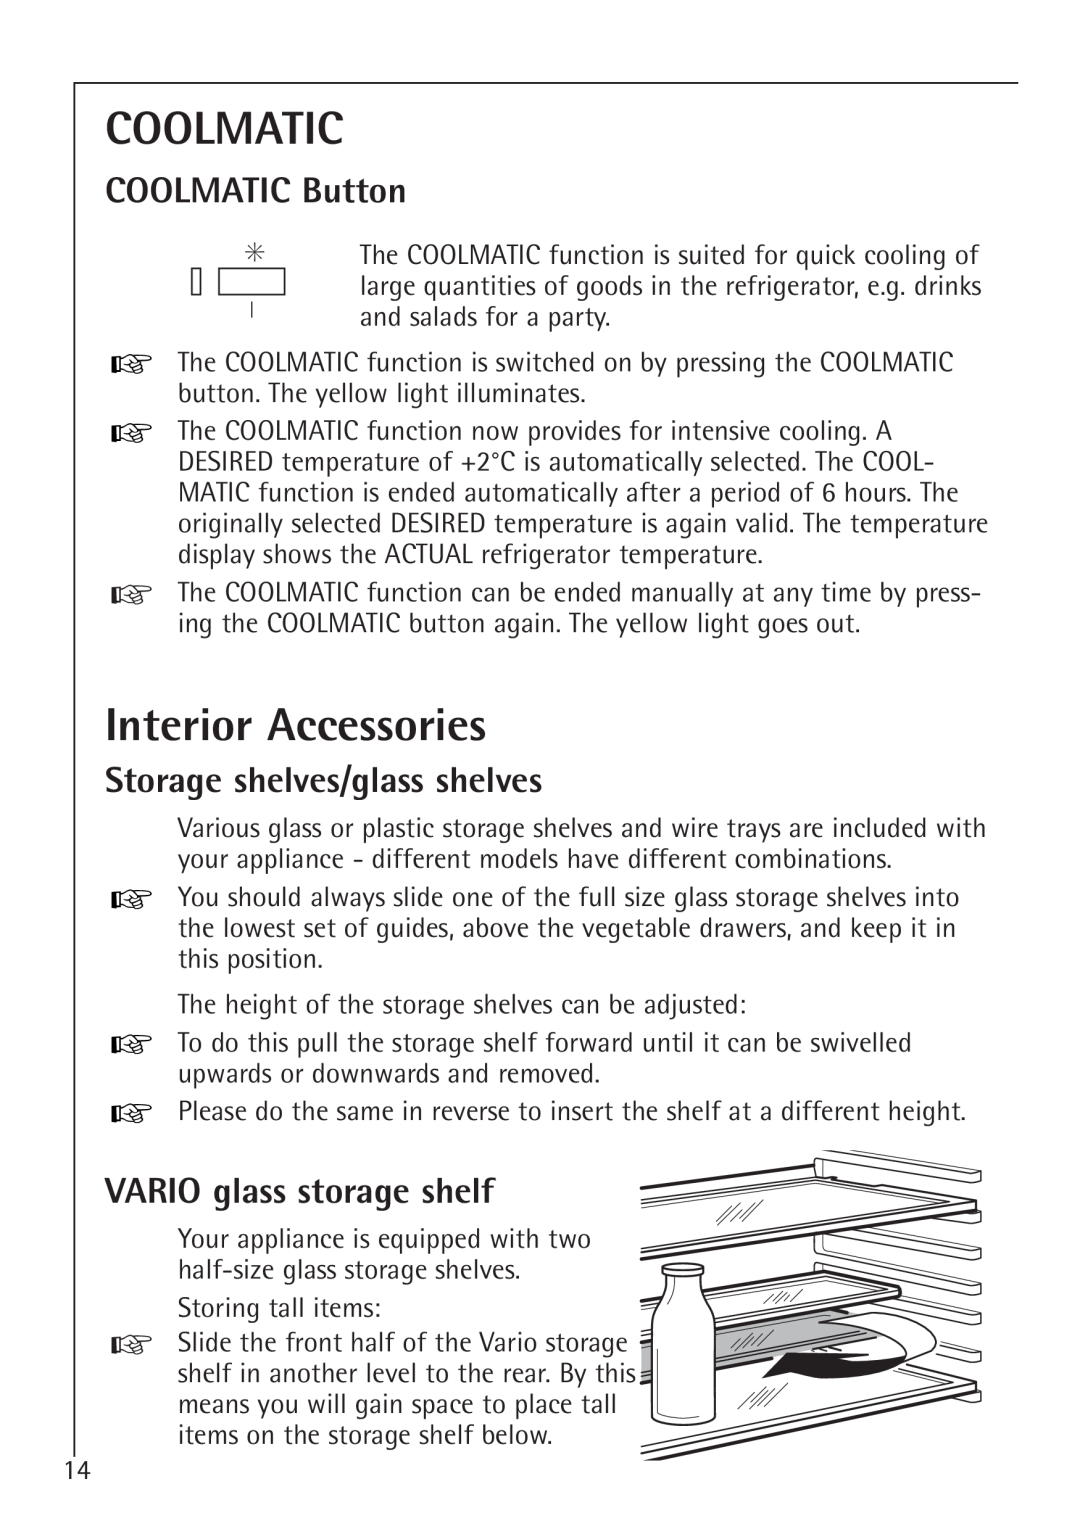 Electrolux 1688-7 TK, 1683-7 TK manual Coolmatic, Interior Accessories, COOLMATIC Button, Storage shelves/glass shelves 